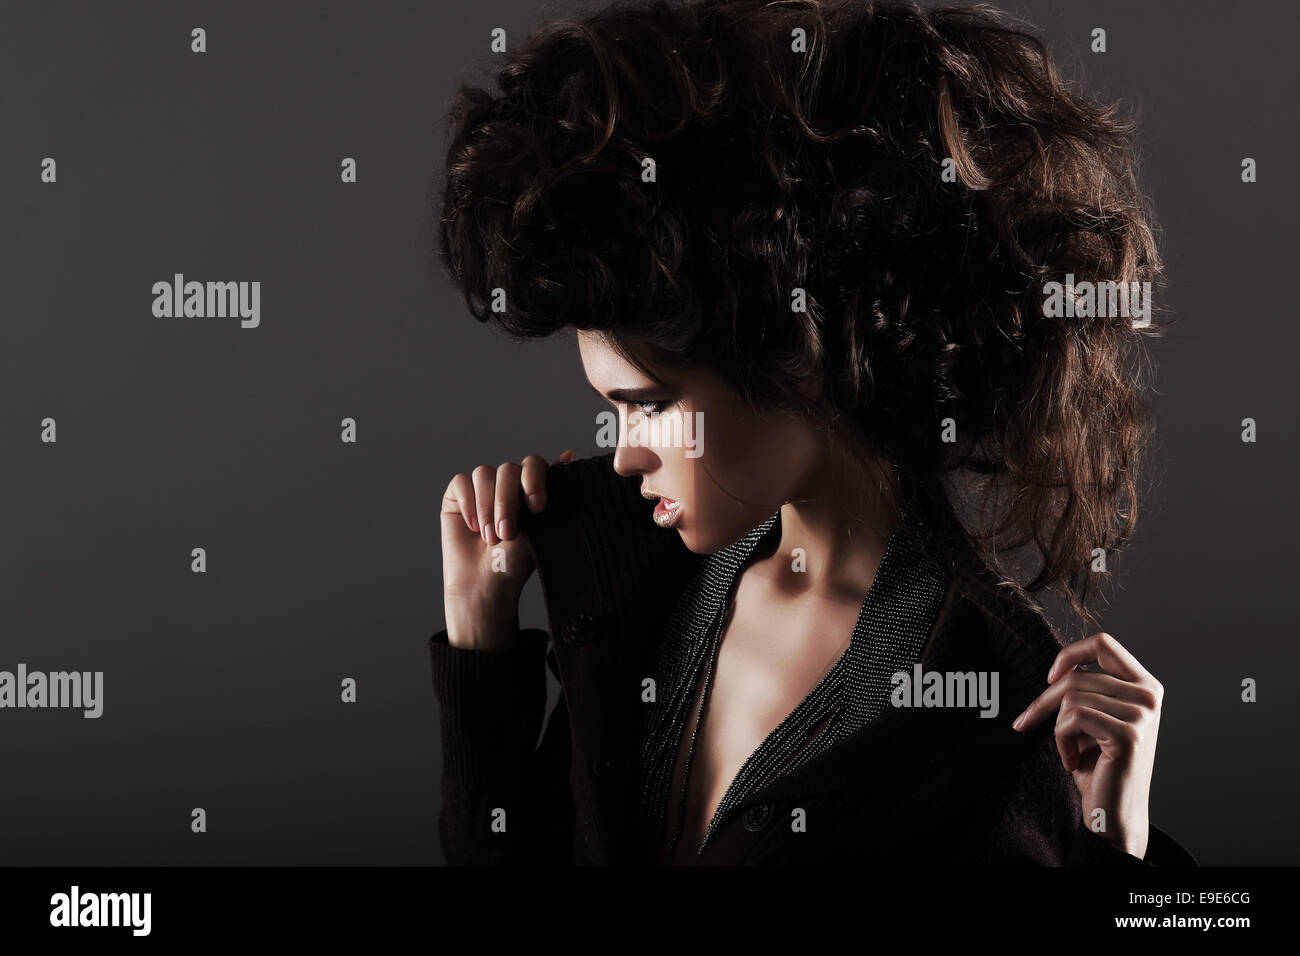 Updo. Eccentric Woman with Styled Curly Hairs Stock Photo